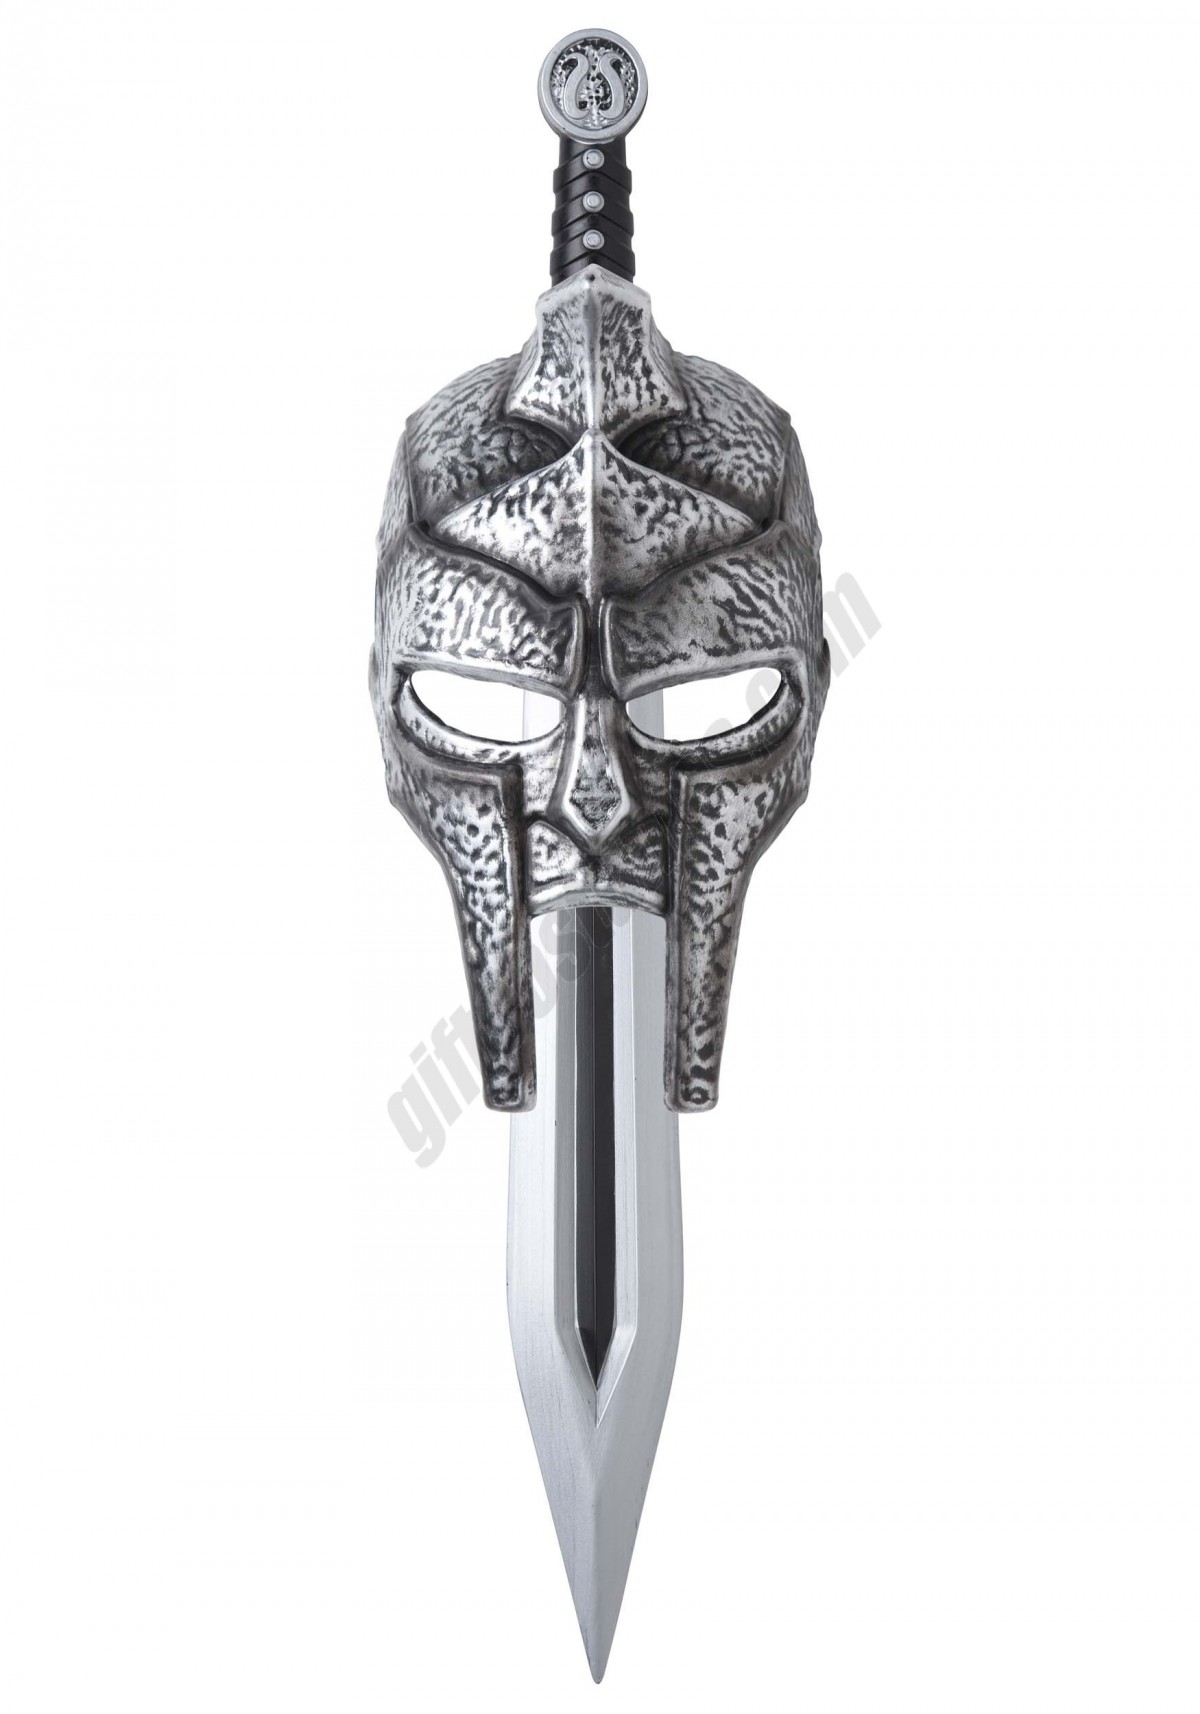 Kid's Gladiator Mask and Sword Promotions - -0